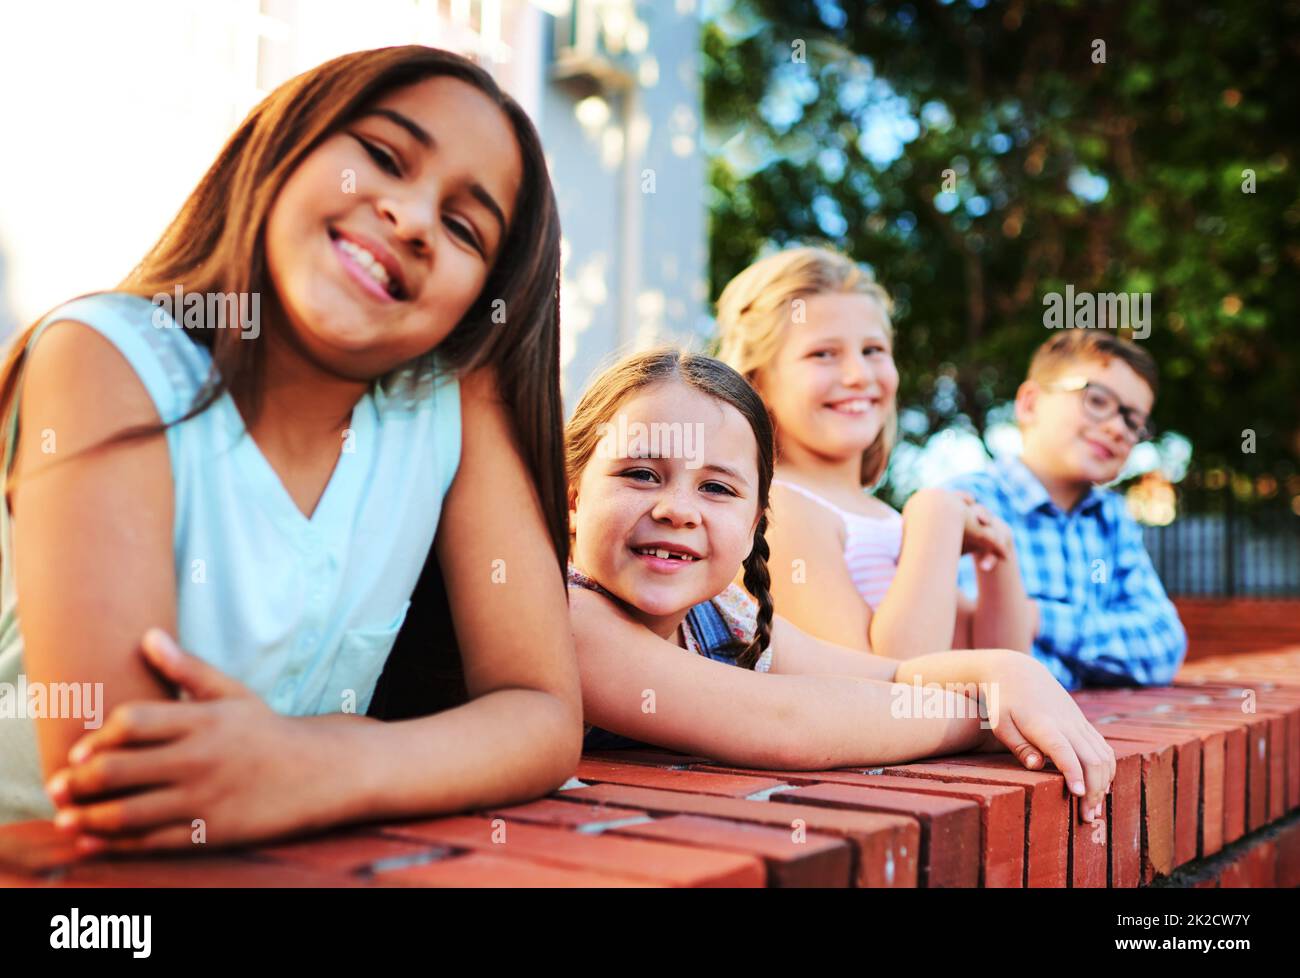 Come hangout with the cool kids. Portrait of a group of young children playing together outside. Stock Photo